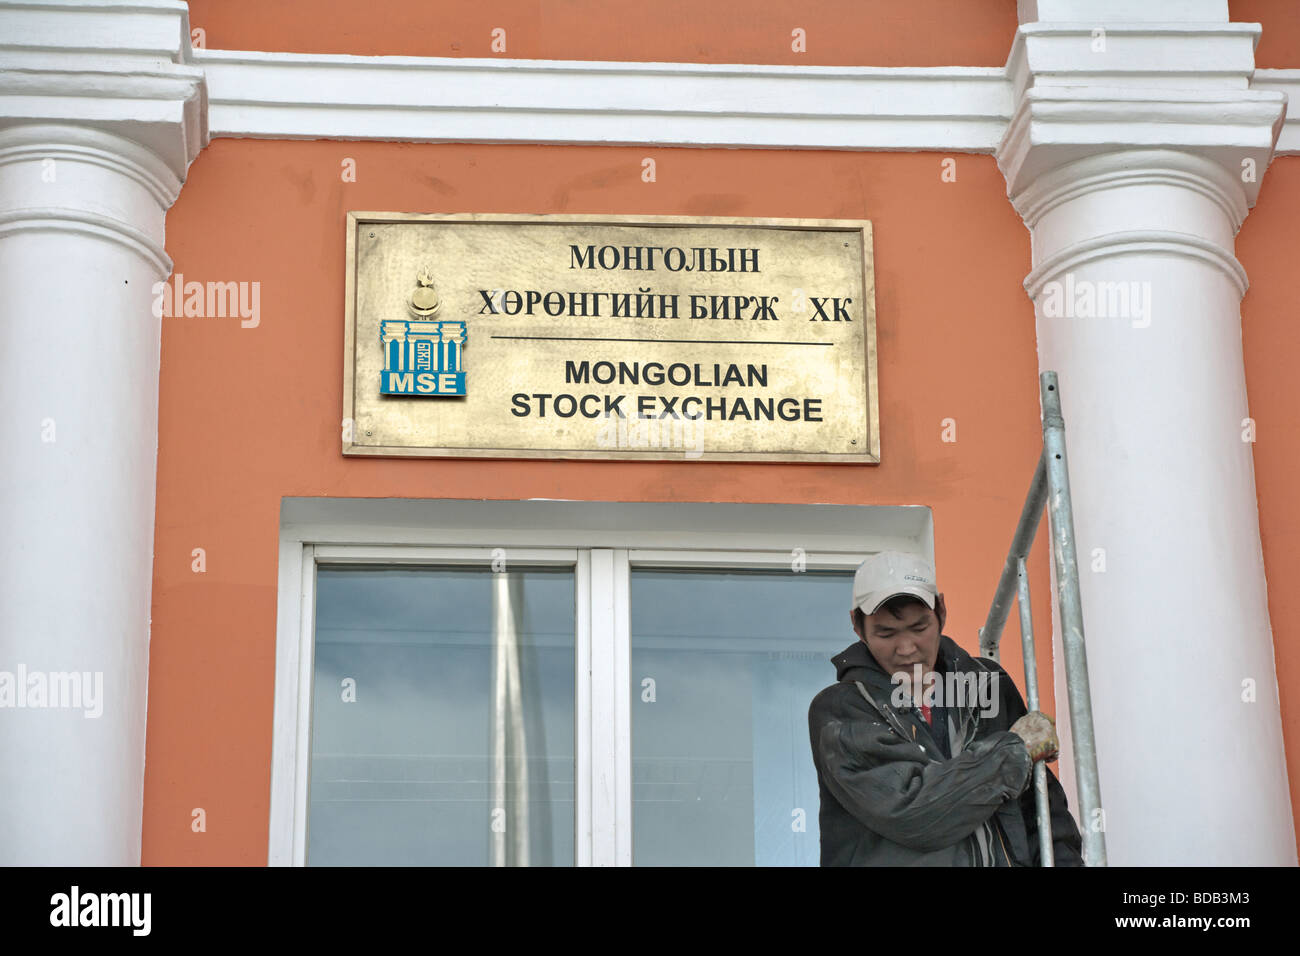 Bright brass sign for the Mongolian Stock Exchange with a contrasting workman, Ulaan Baatar, Mongolia Stock Photo